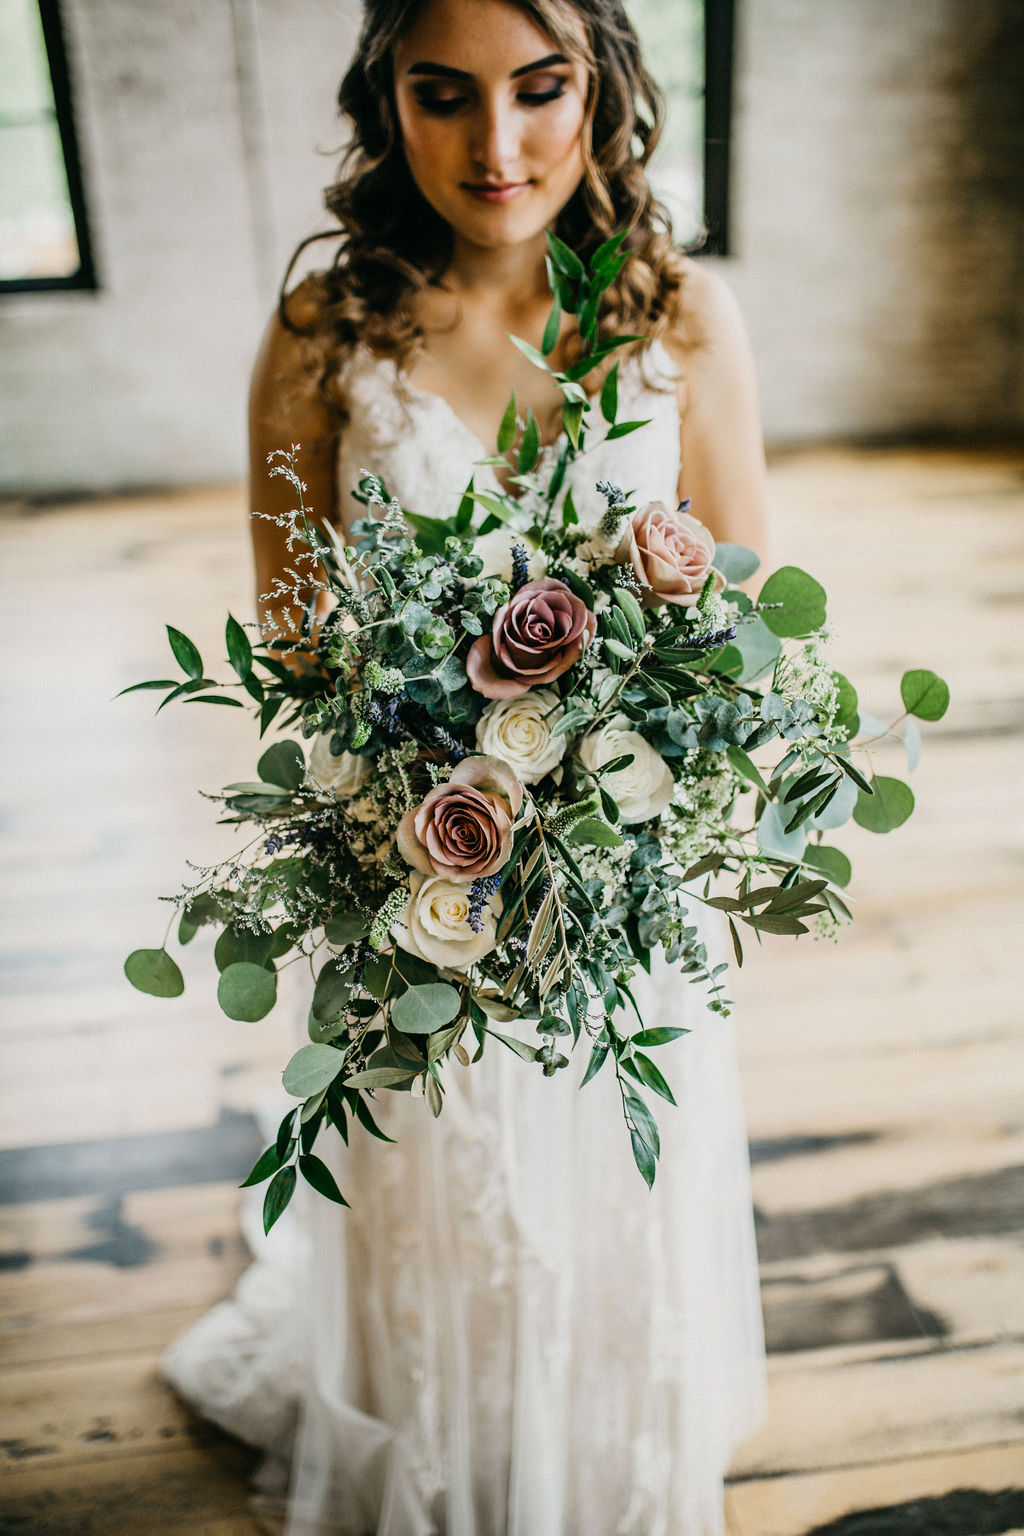 A bride with her bouquet